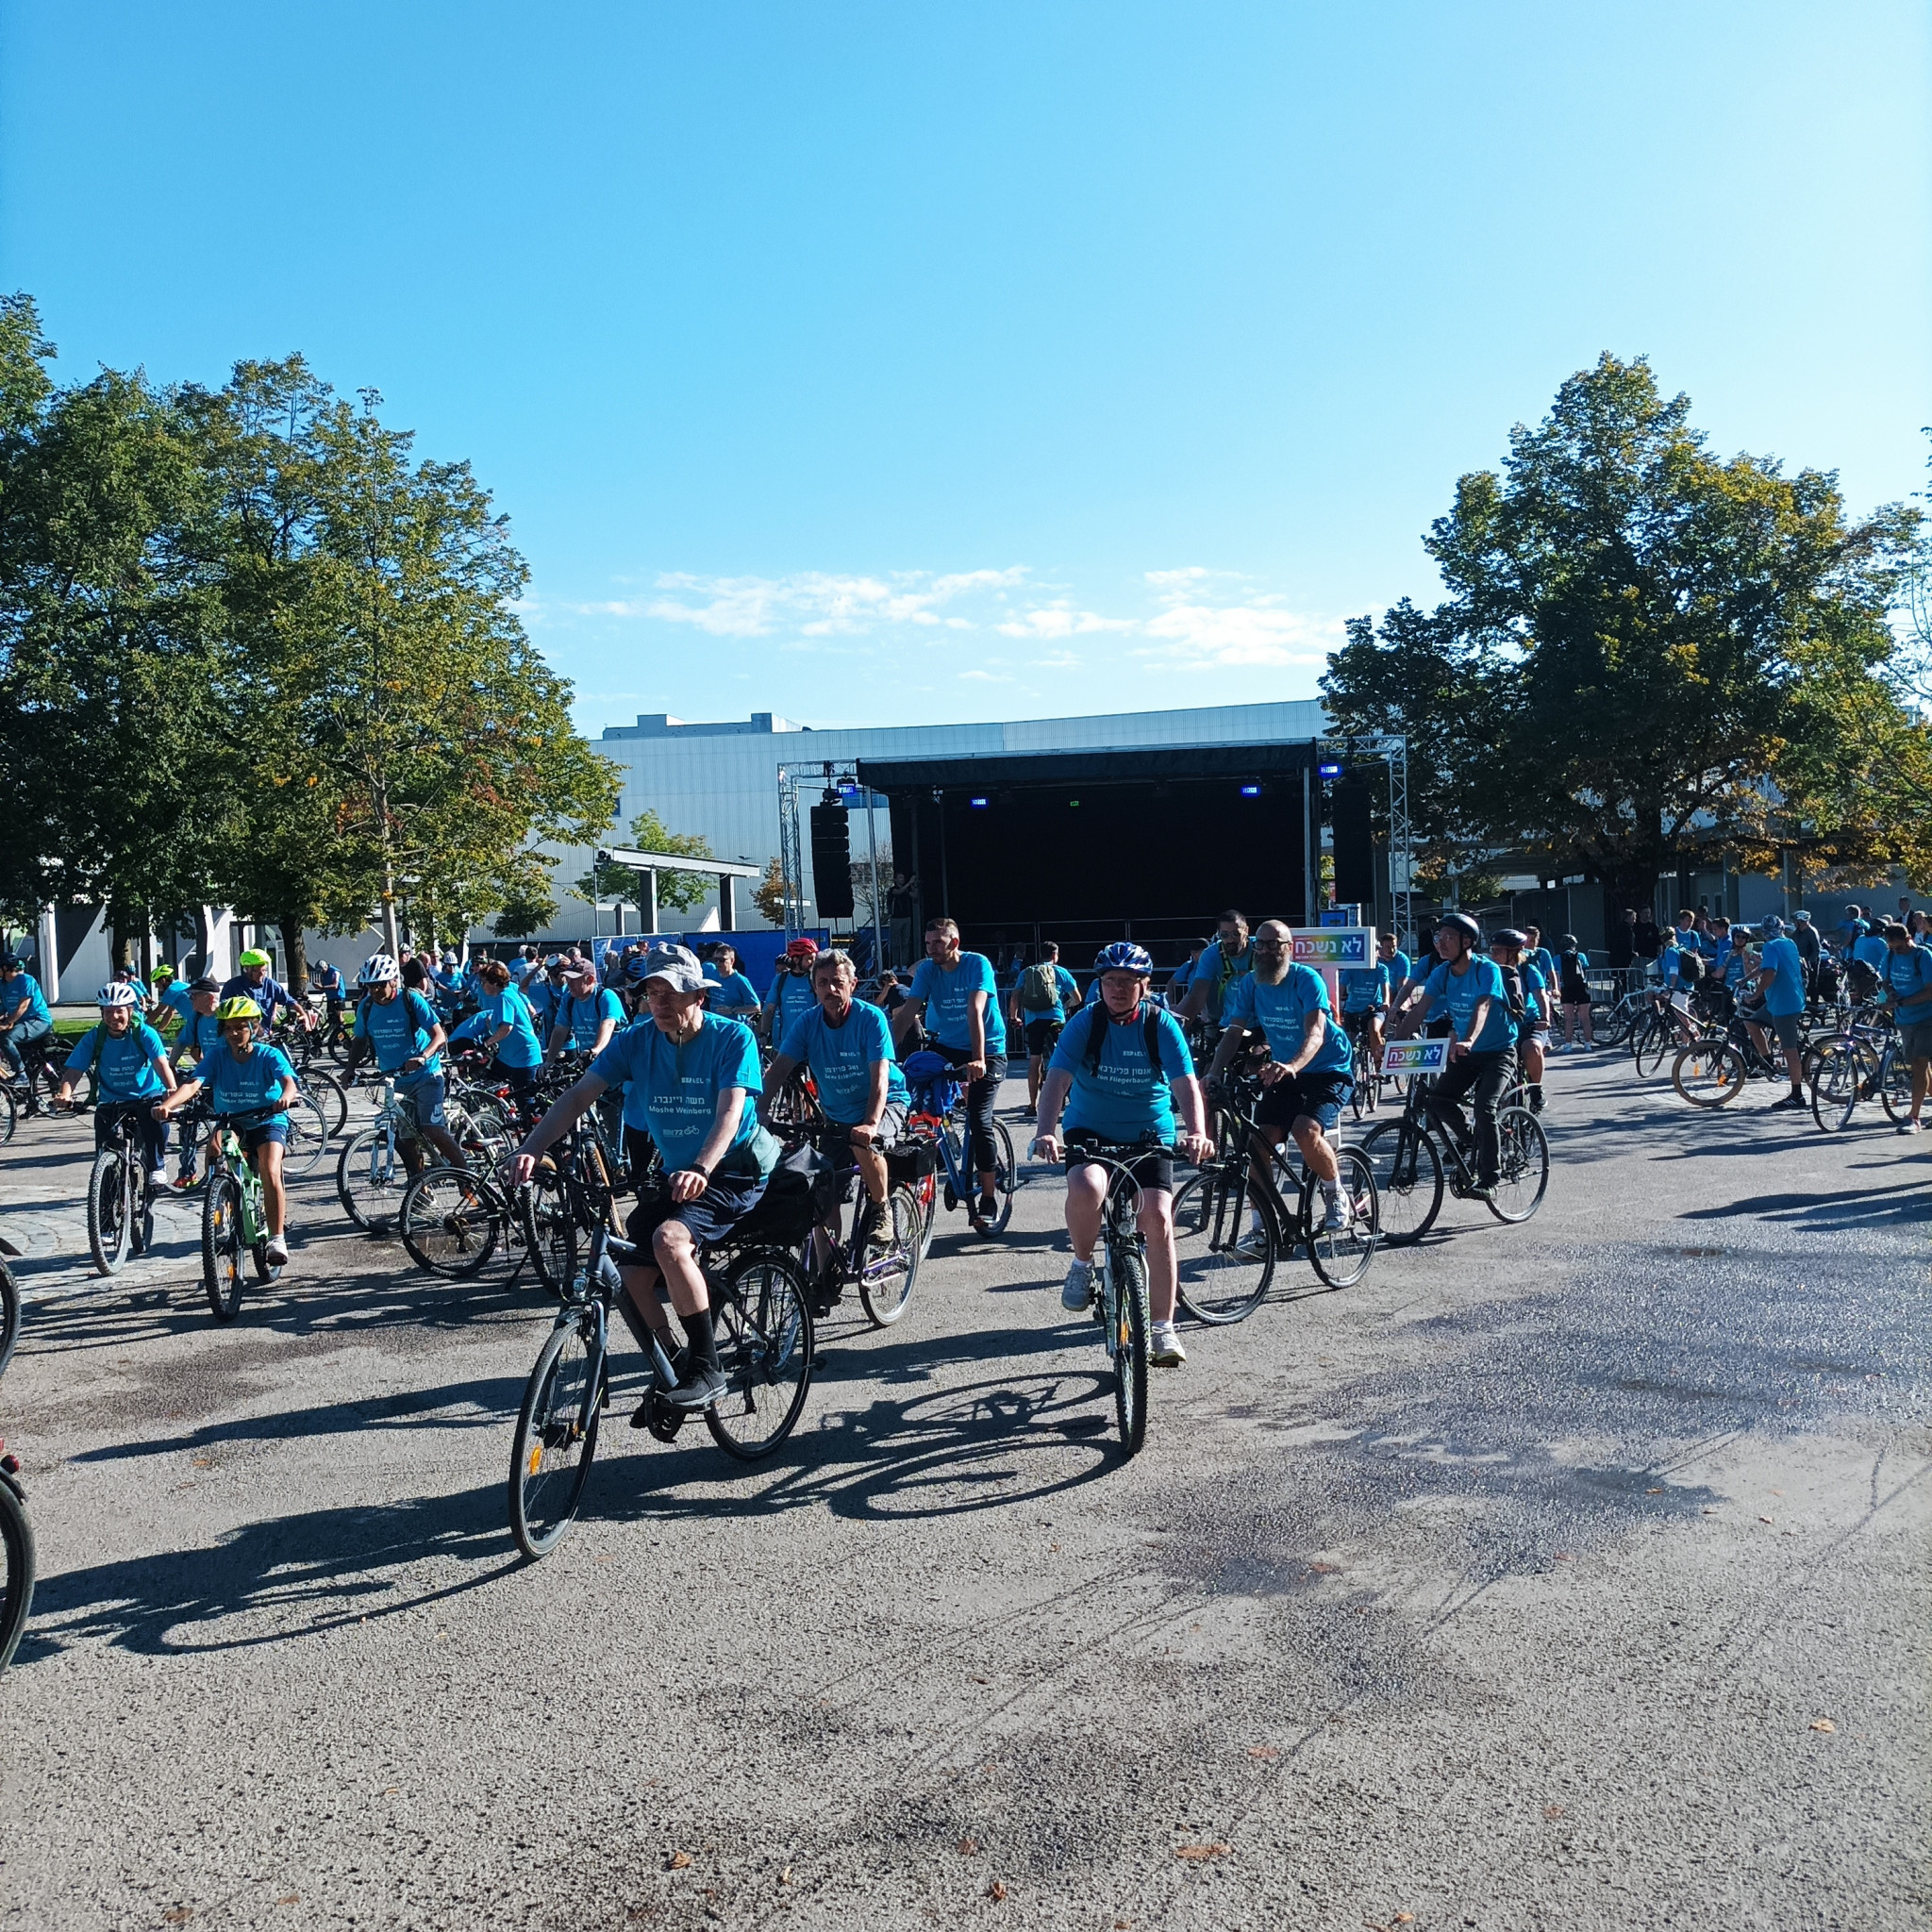 Cyclists set out on a commemorative ride from Munich's Olympic Park to the Fürstenfeldbruck air base ©ITG